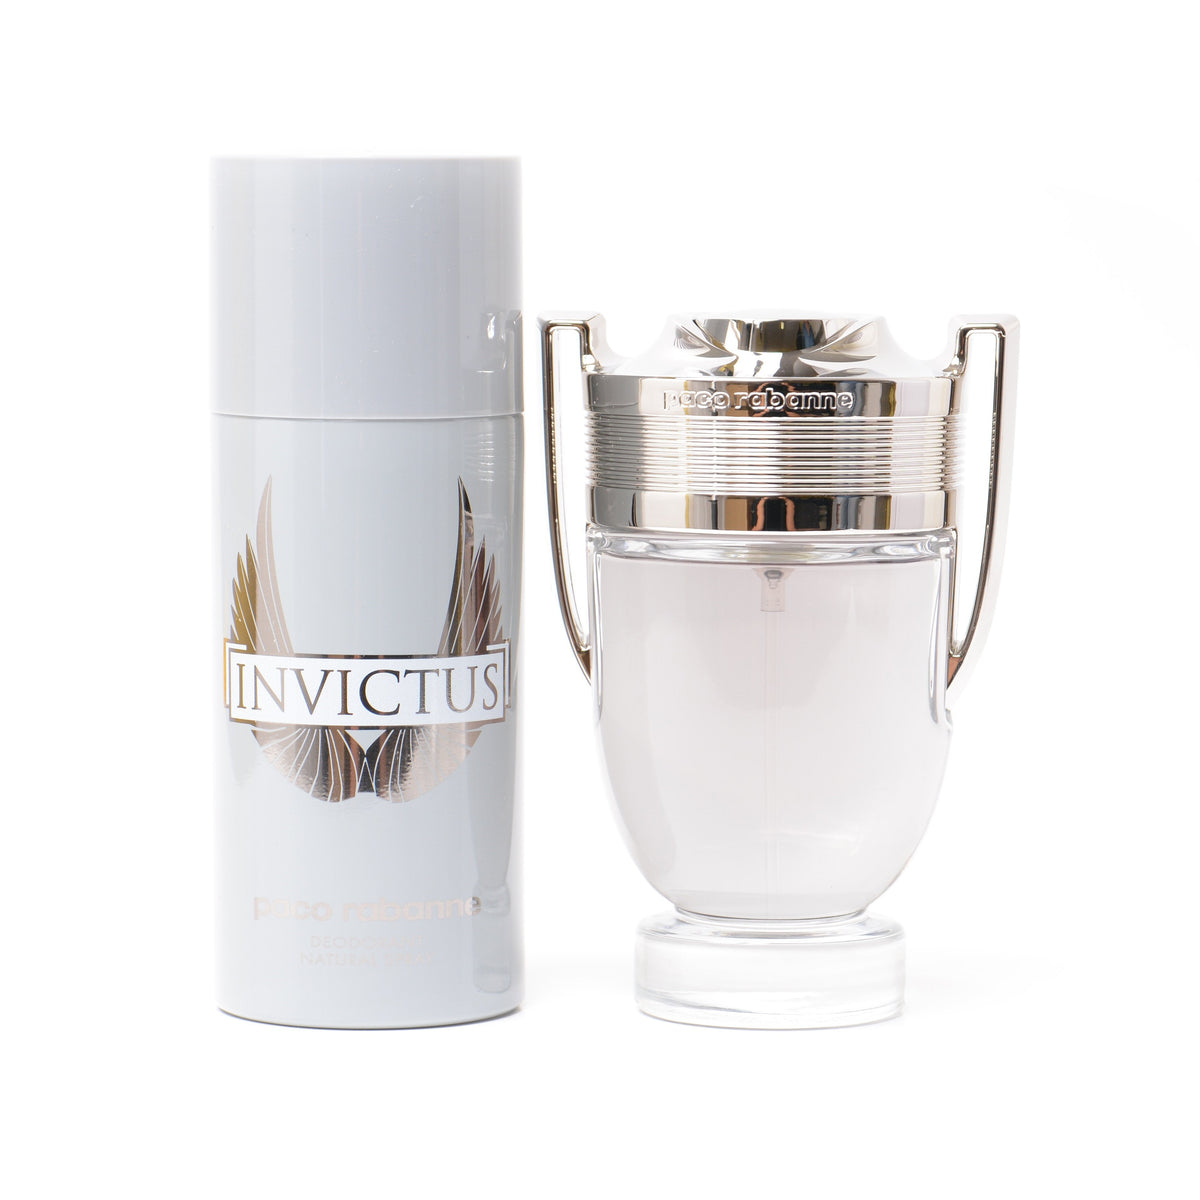 Invictus Set for Men by Paco Rabanne